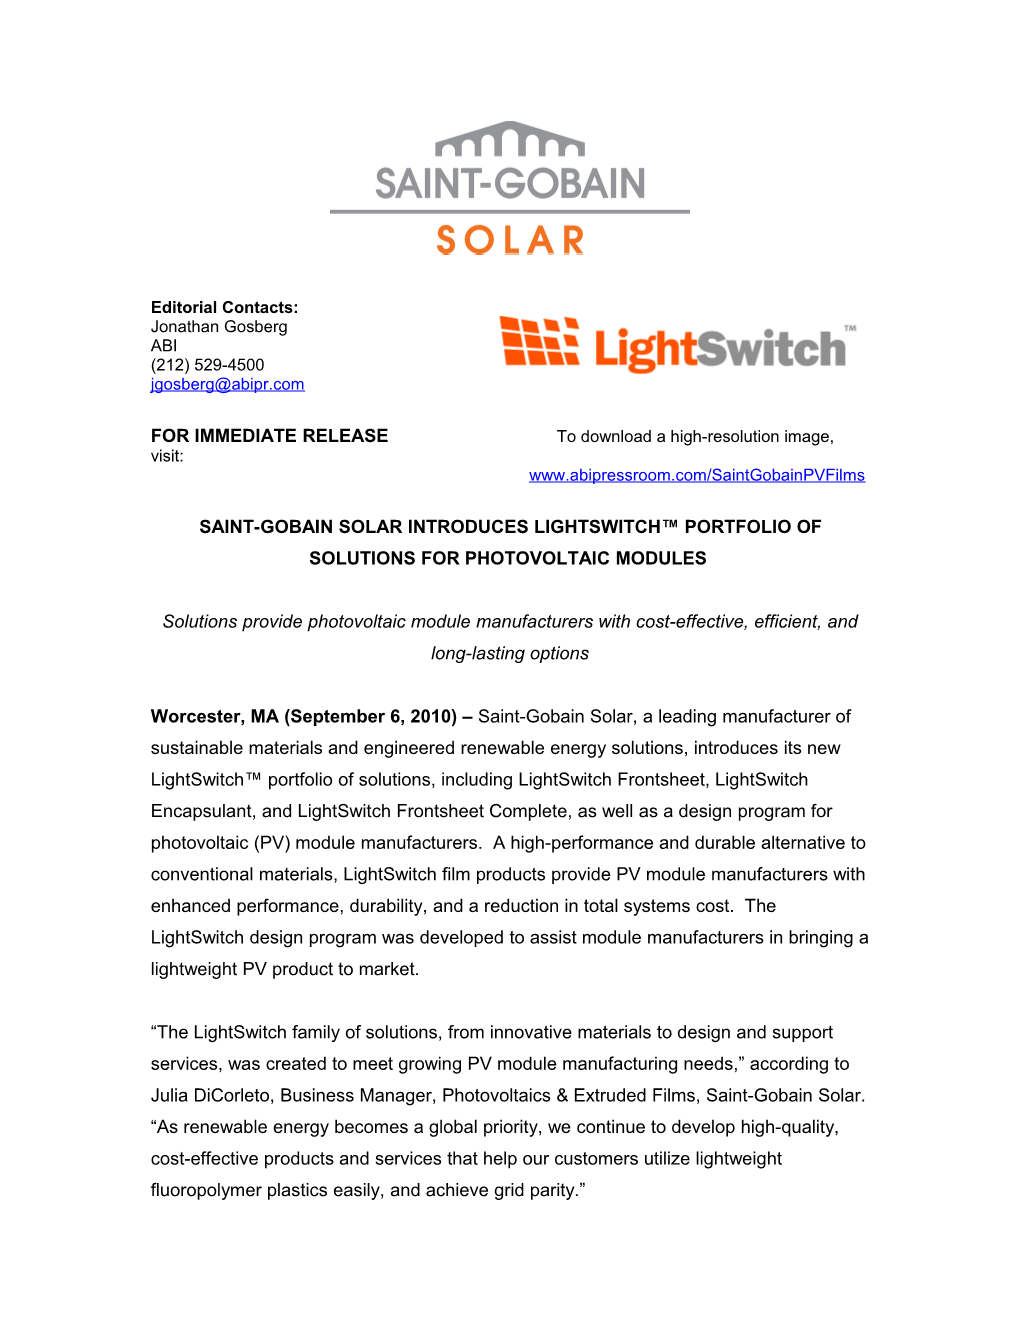 Saint-Gobain Solar Presents Cost Effective Solutions for Photovoltaic Modules